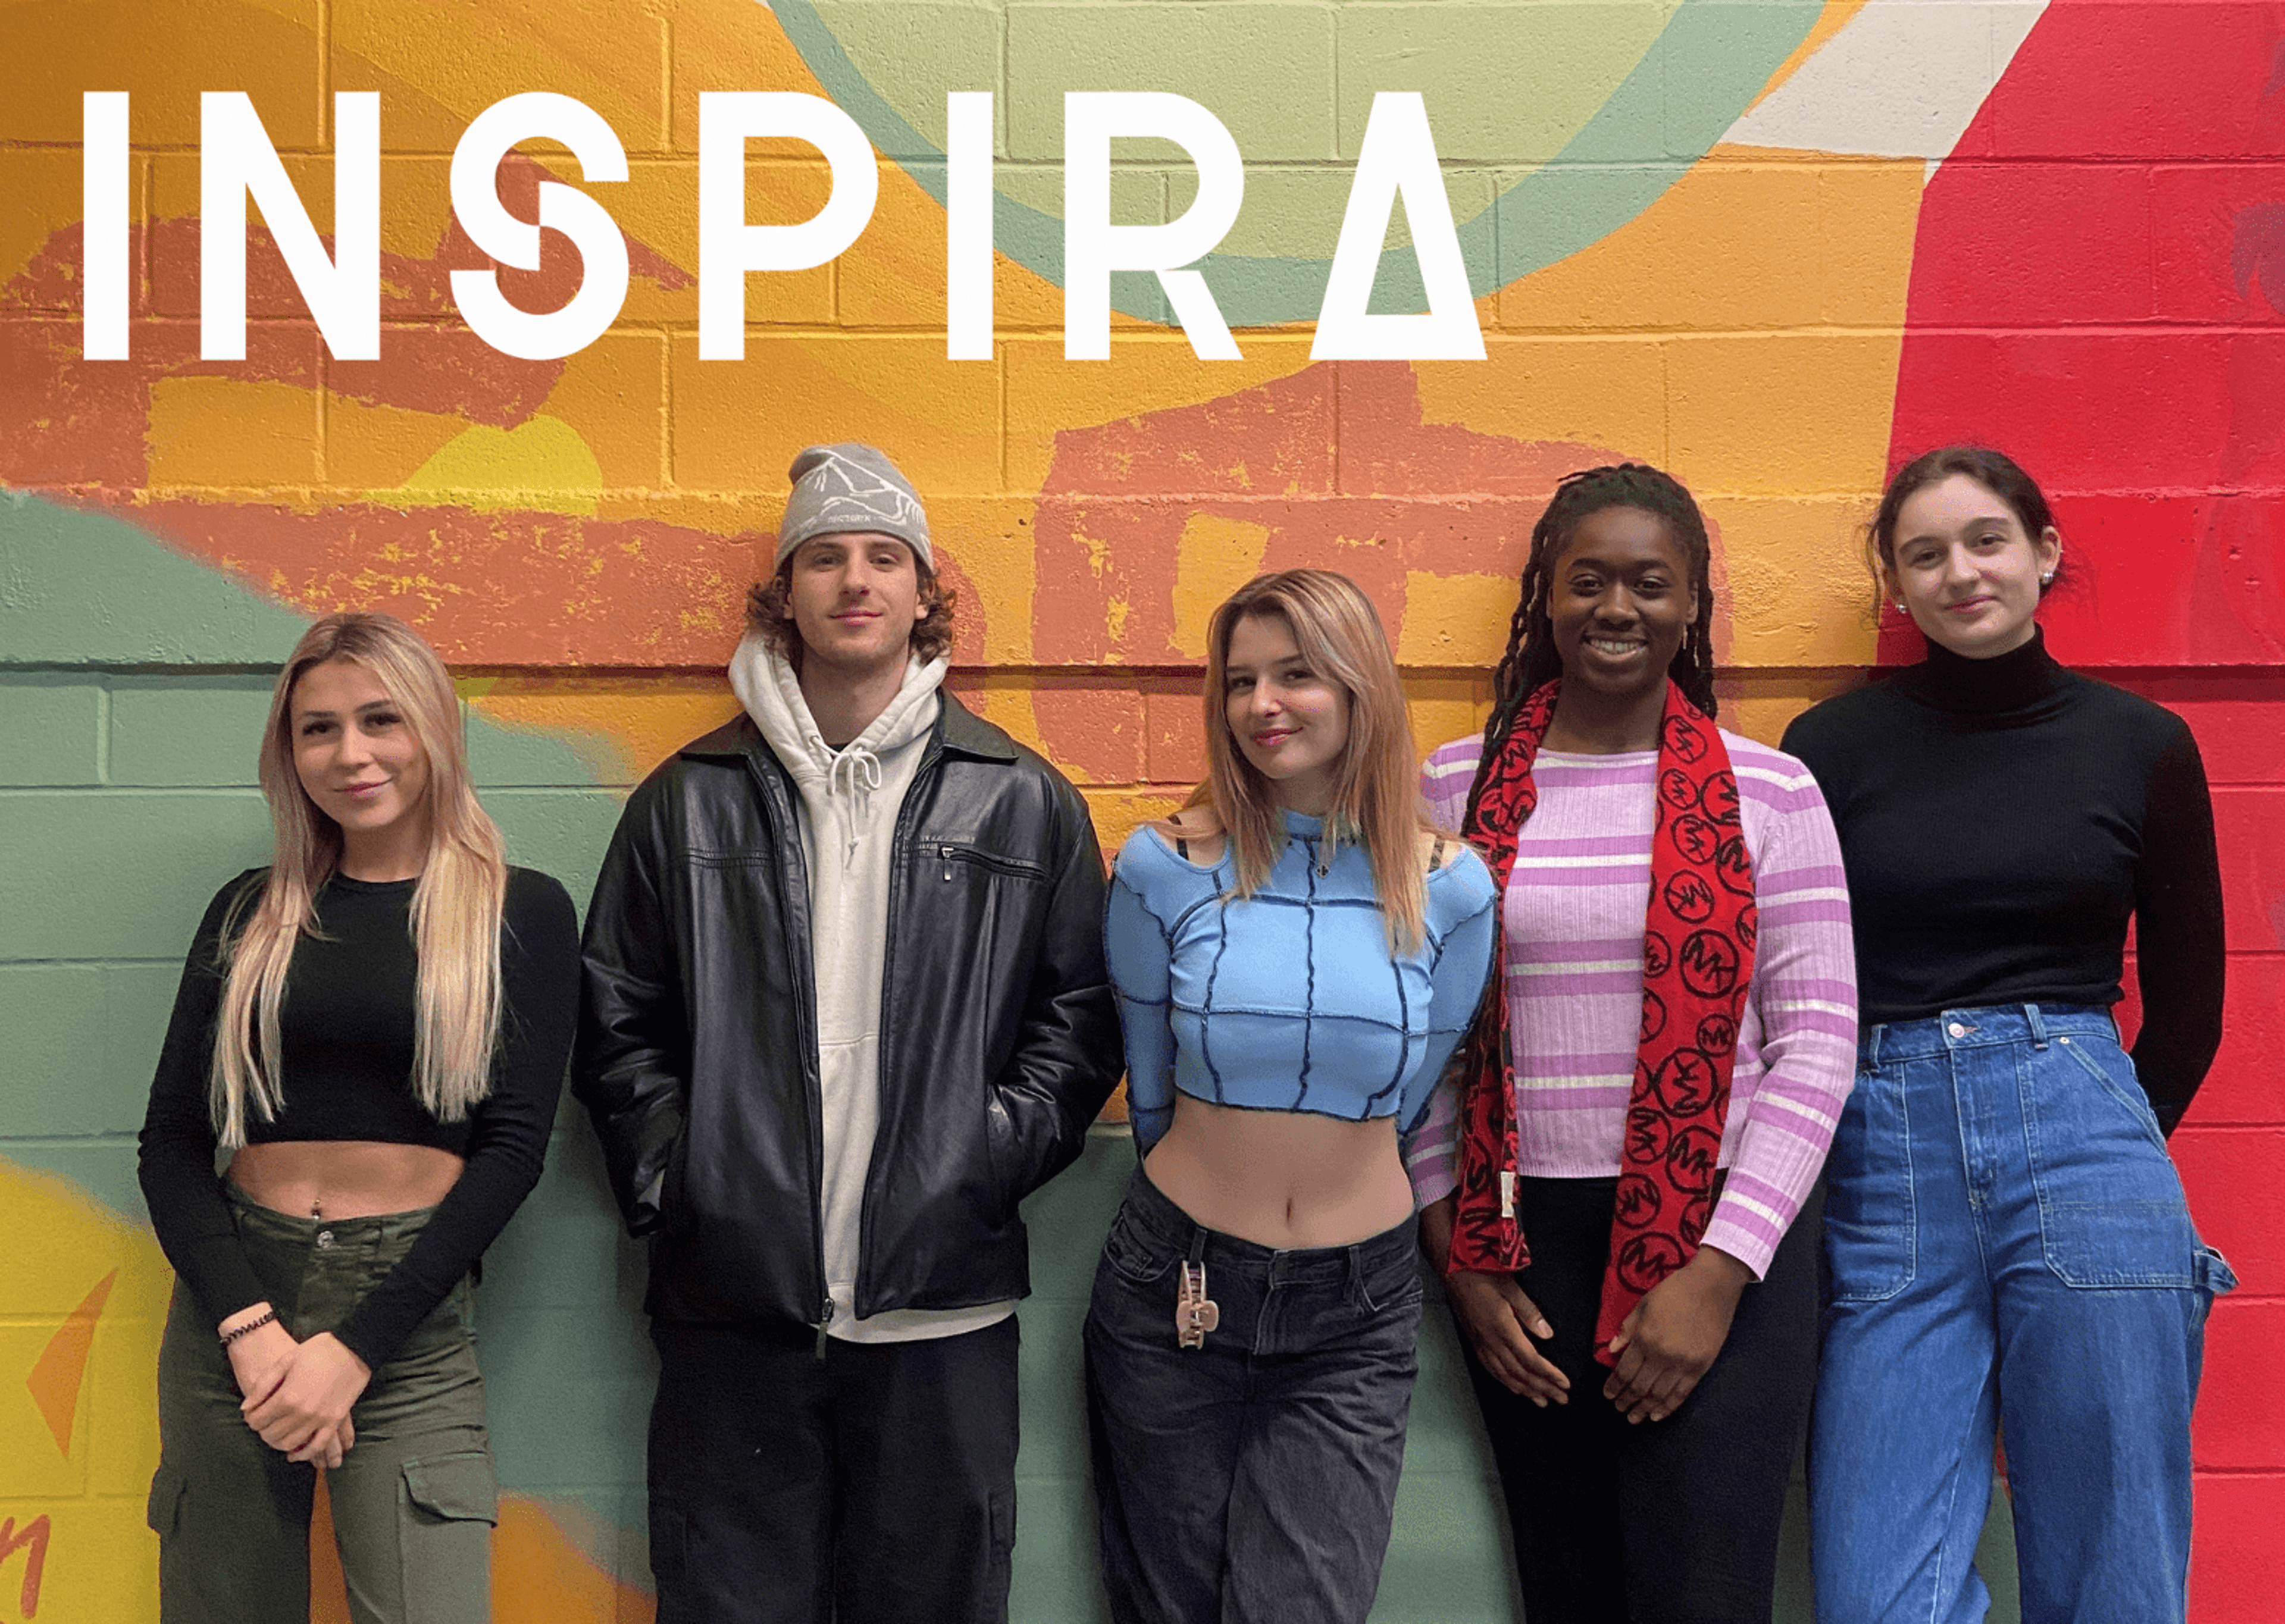 A diverse group of young adults standing confidently in front of a colorful mural, embodying youthful inspiration.